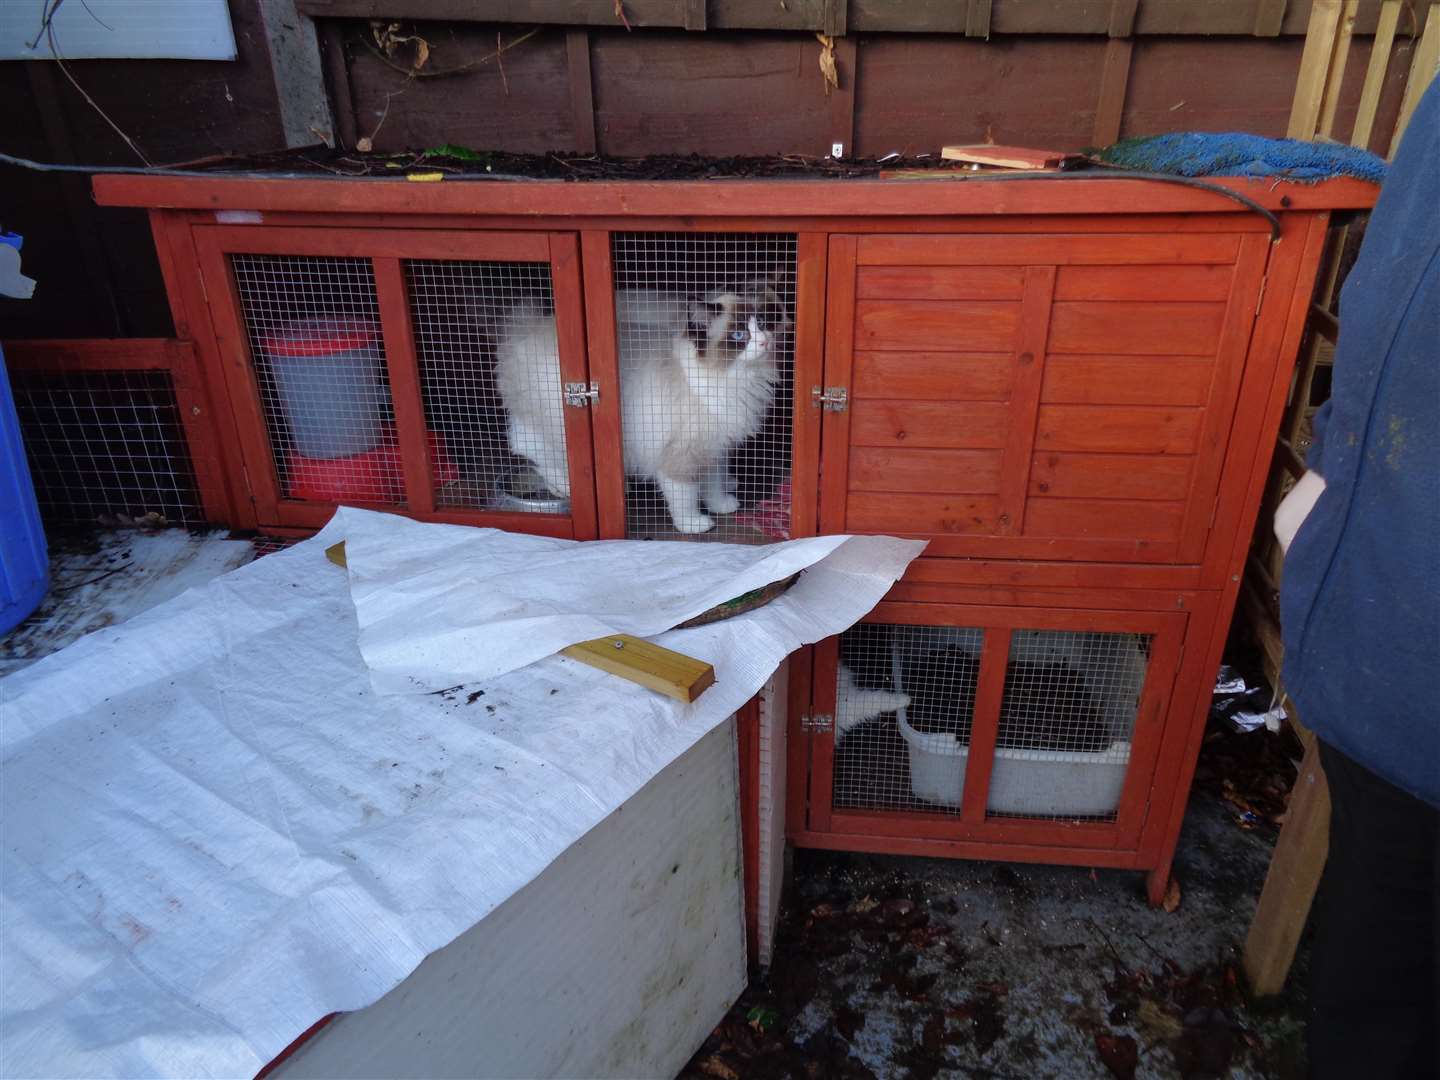 A total of 56 animals were found living in terrible conditions when the RSPCA and Met Police searched the Bexleyheath property. Picture: RSPCA